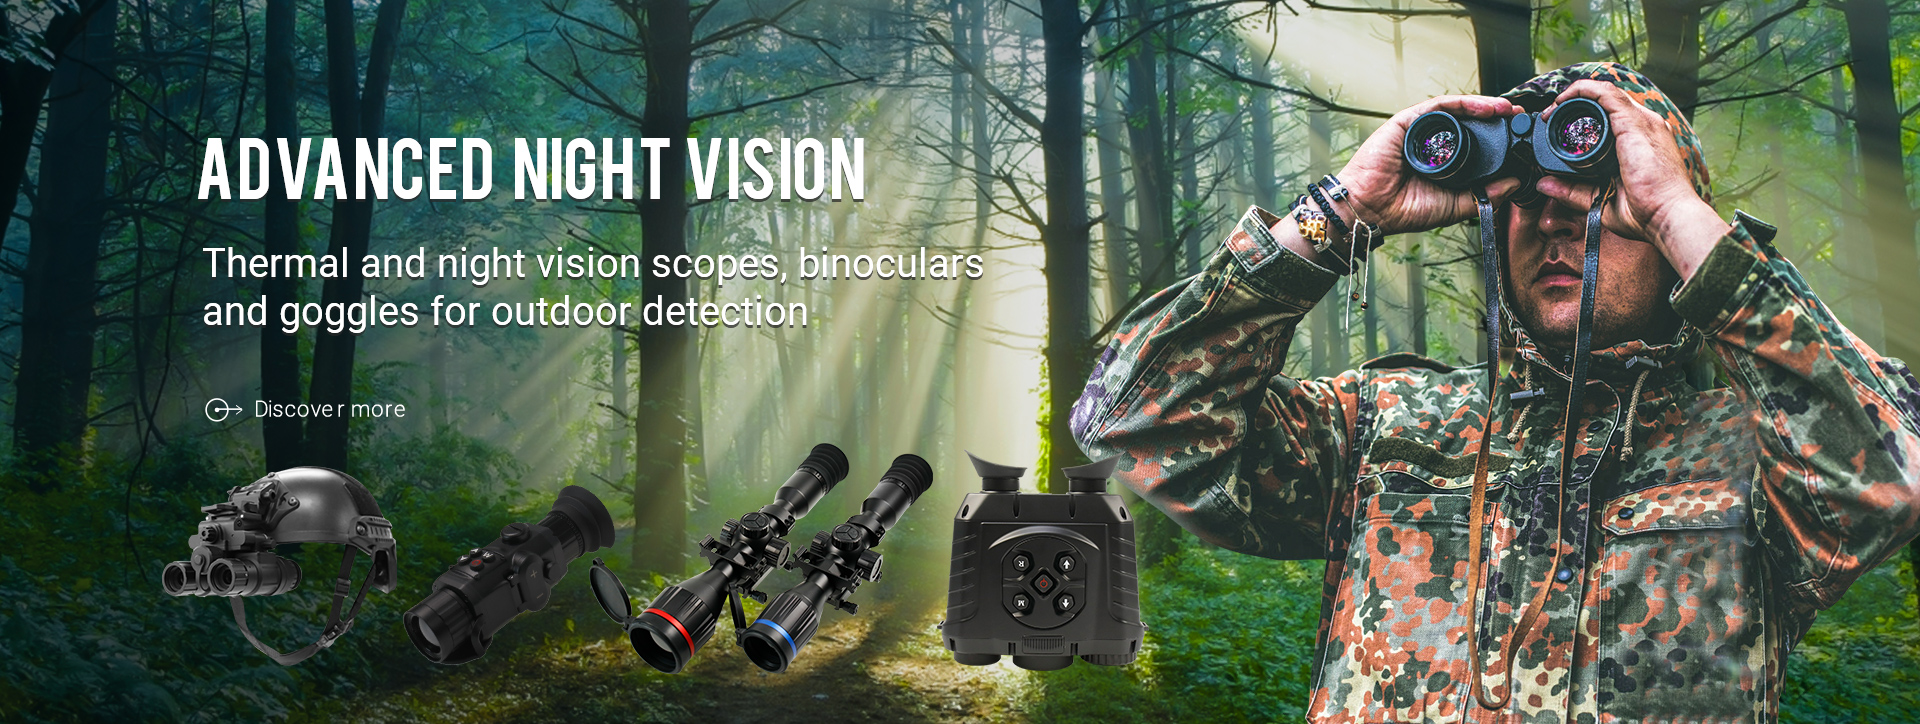 Thermal and Night Vision Devices